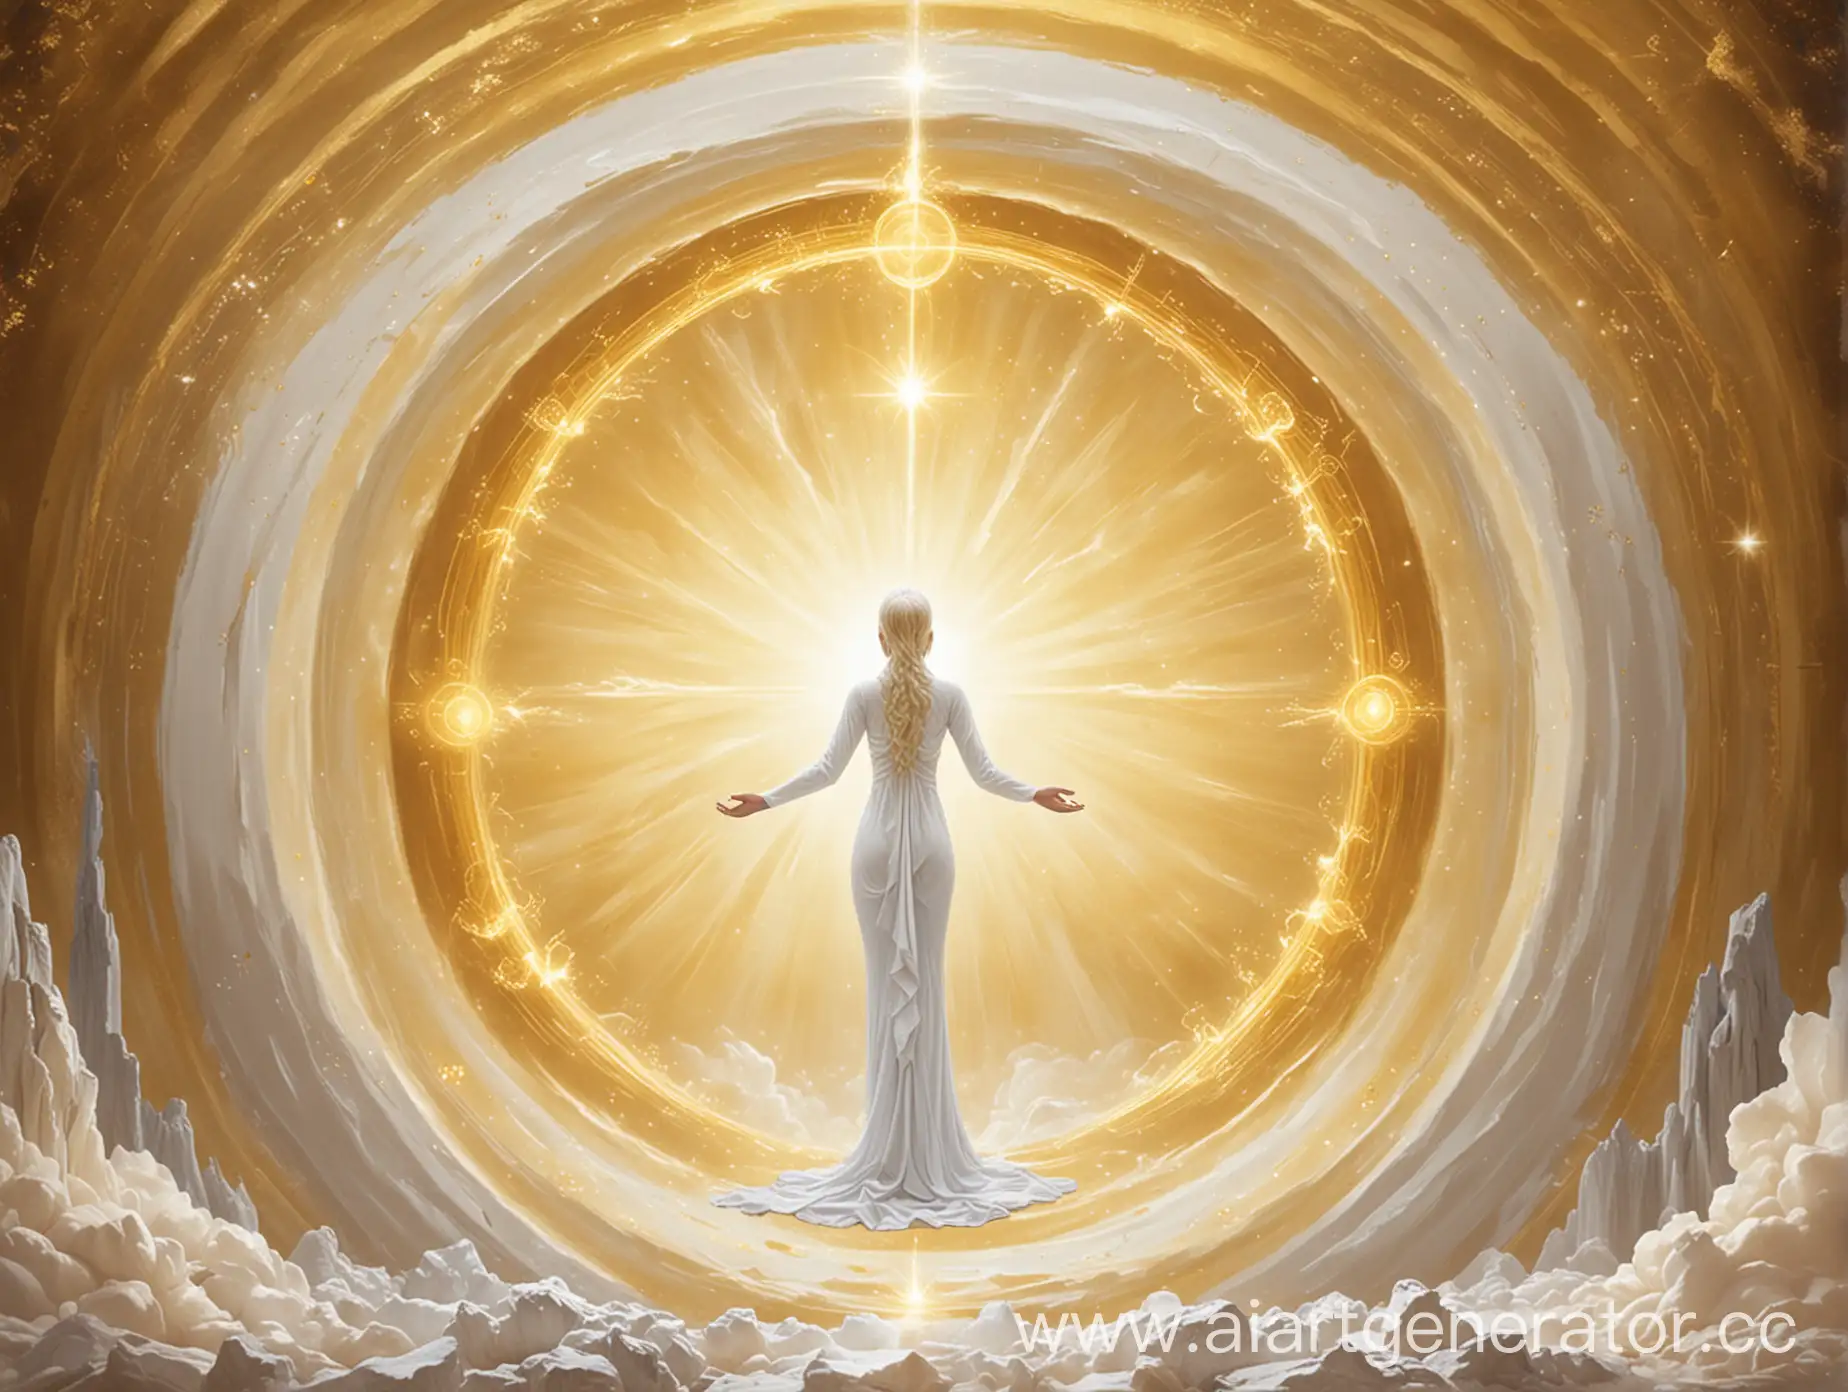 enlightenment, higher wisdom, gold and white energies portal, soul healing